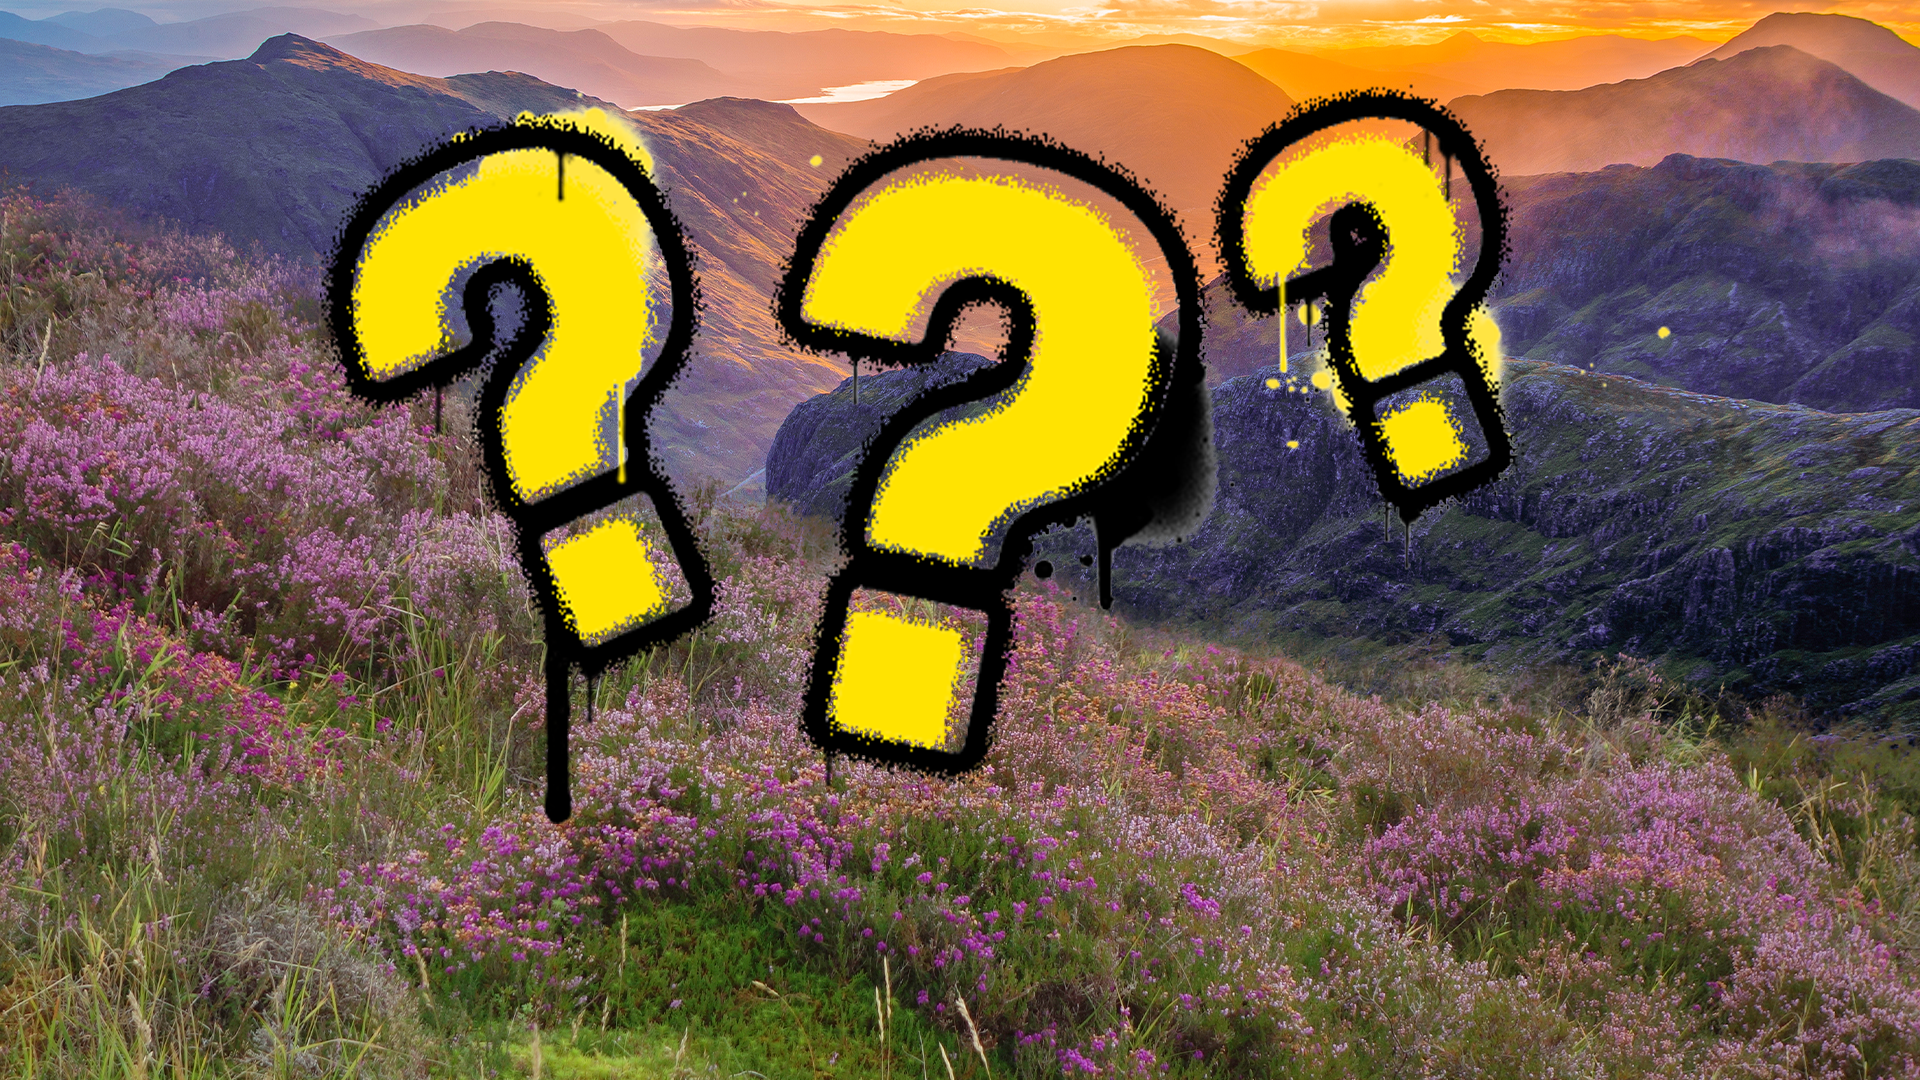 Scottish highlands with question marks